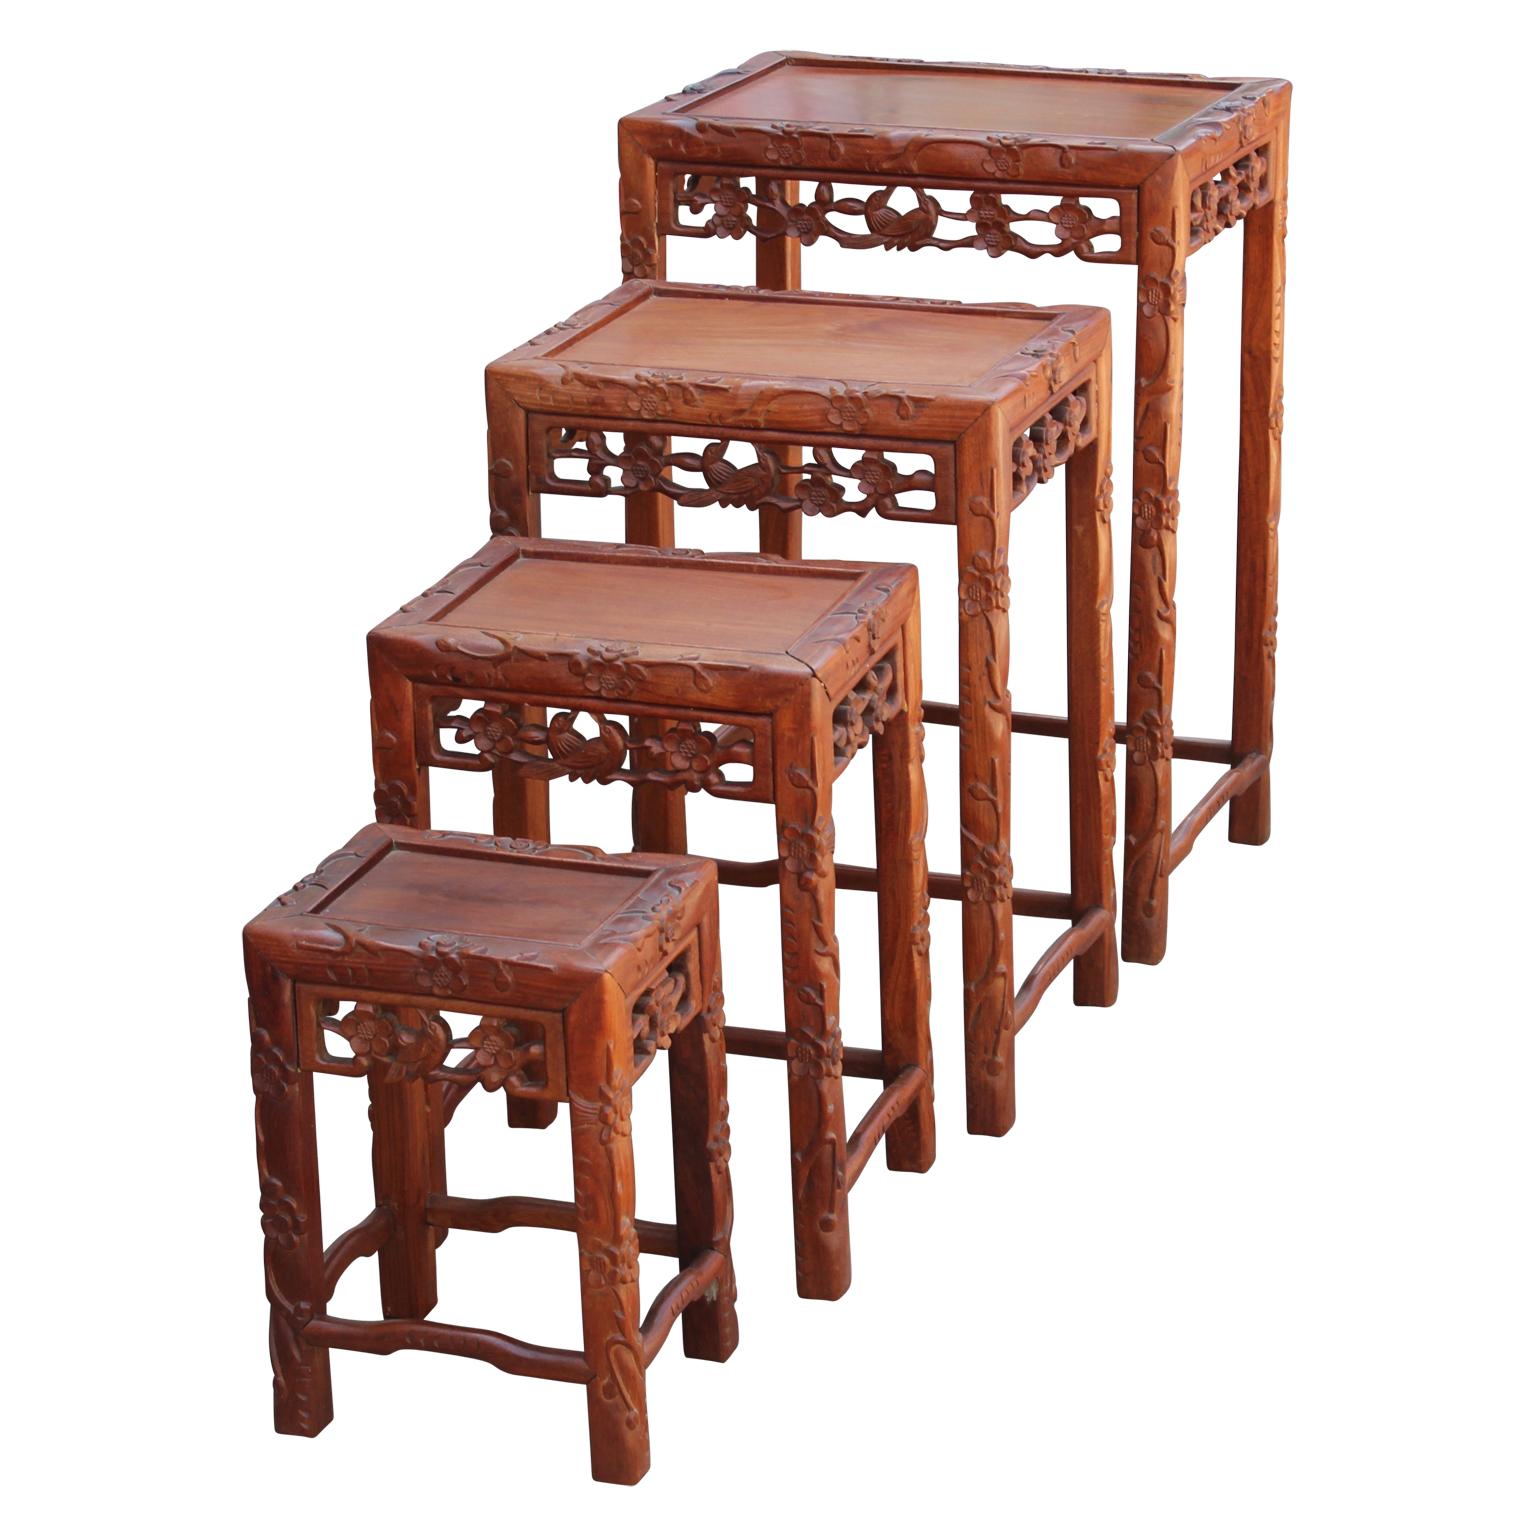 Beautiful set of four 20th century intricately carved nesting tables. They are Chinese in origin and are made from a stunning camphor wood. The tables feature carvings on the sides, legs, and table tops. The tables can be placed separately or